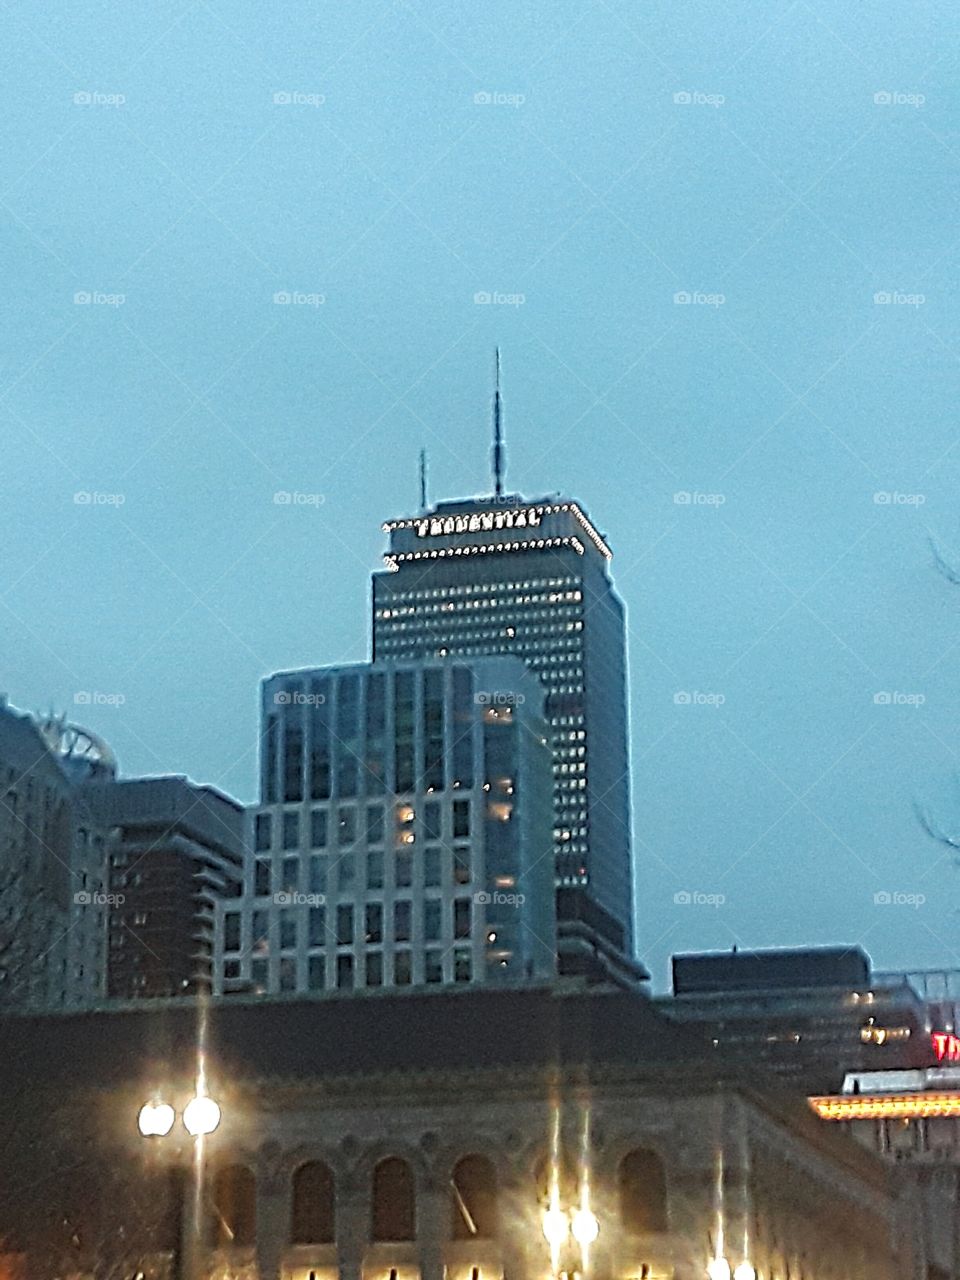 Boston's own The Prudential Tower